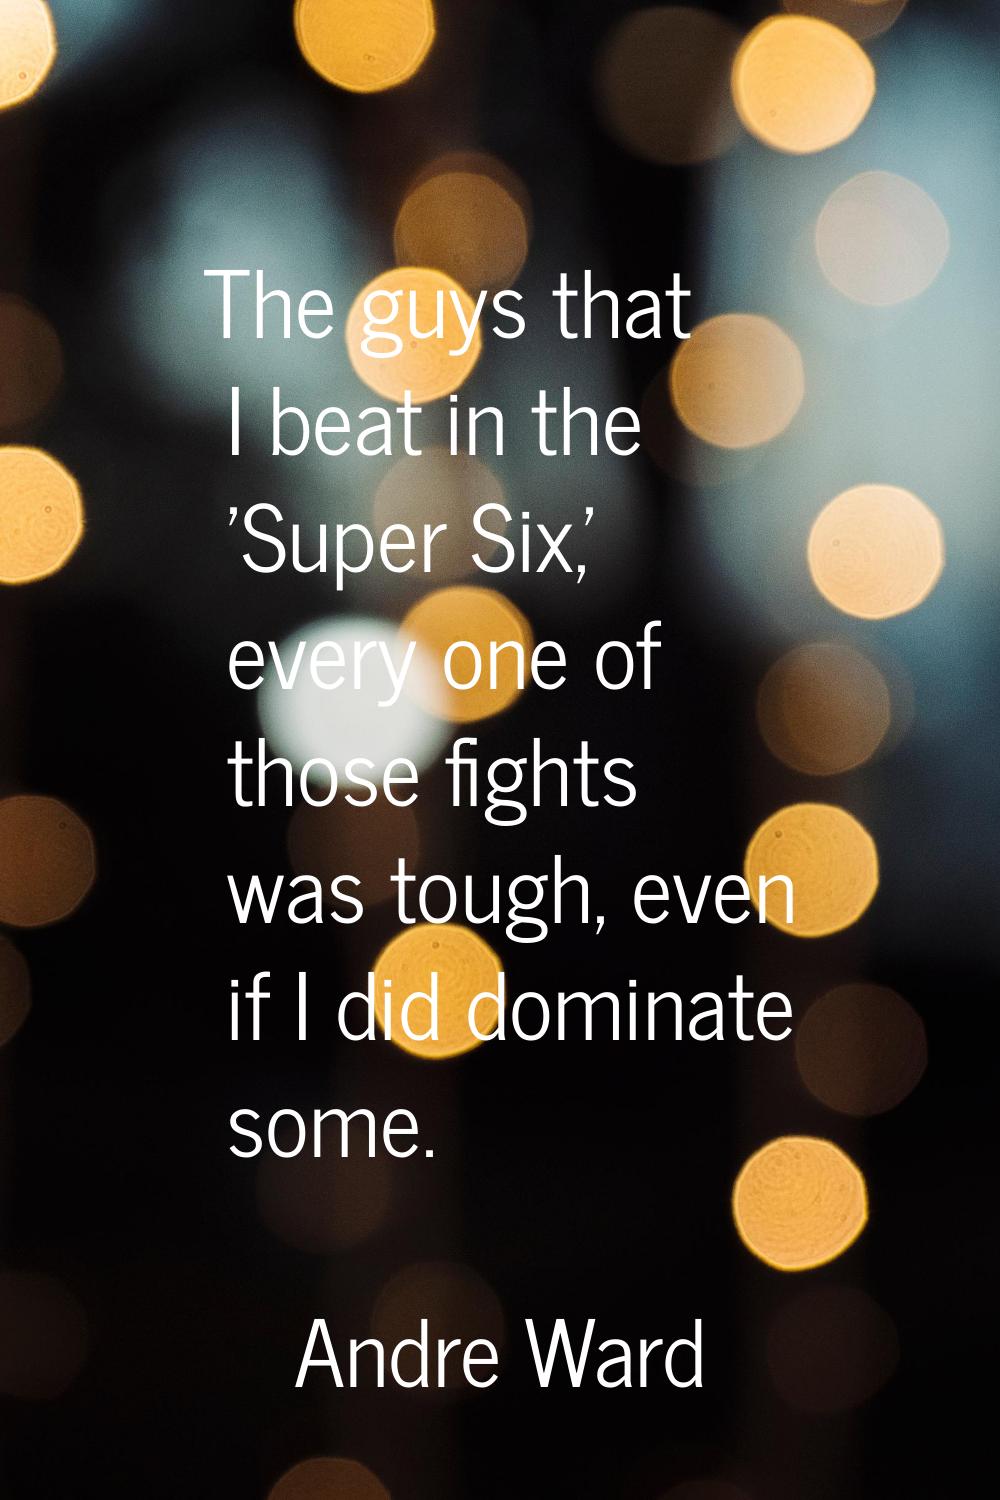 The guys that I beat in the 'Super Six,' every one of those fights was tough, even if I did dominat